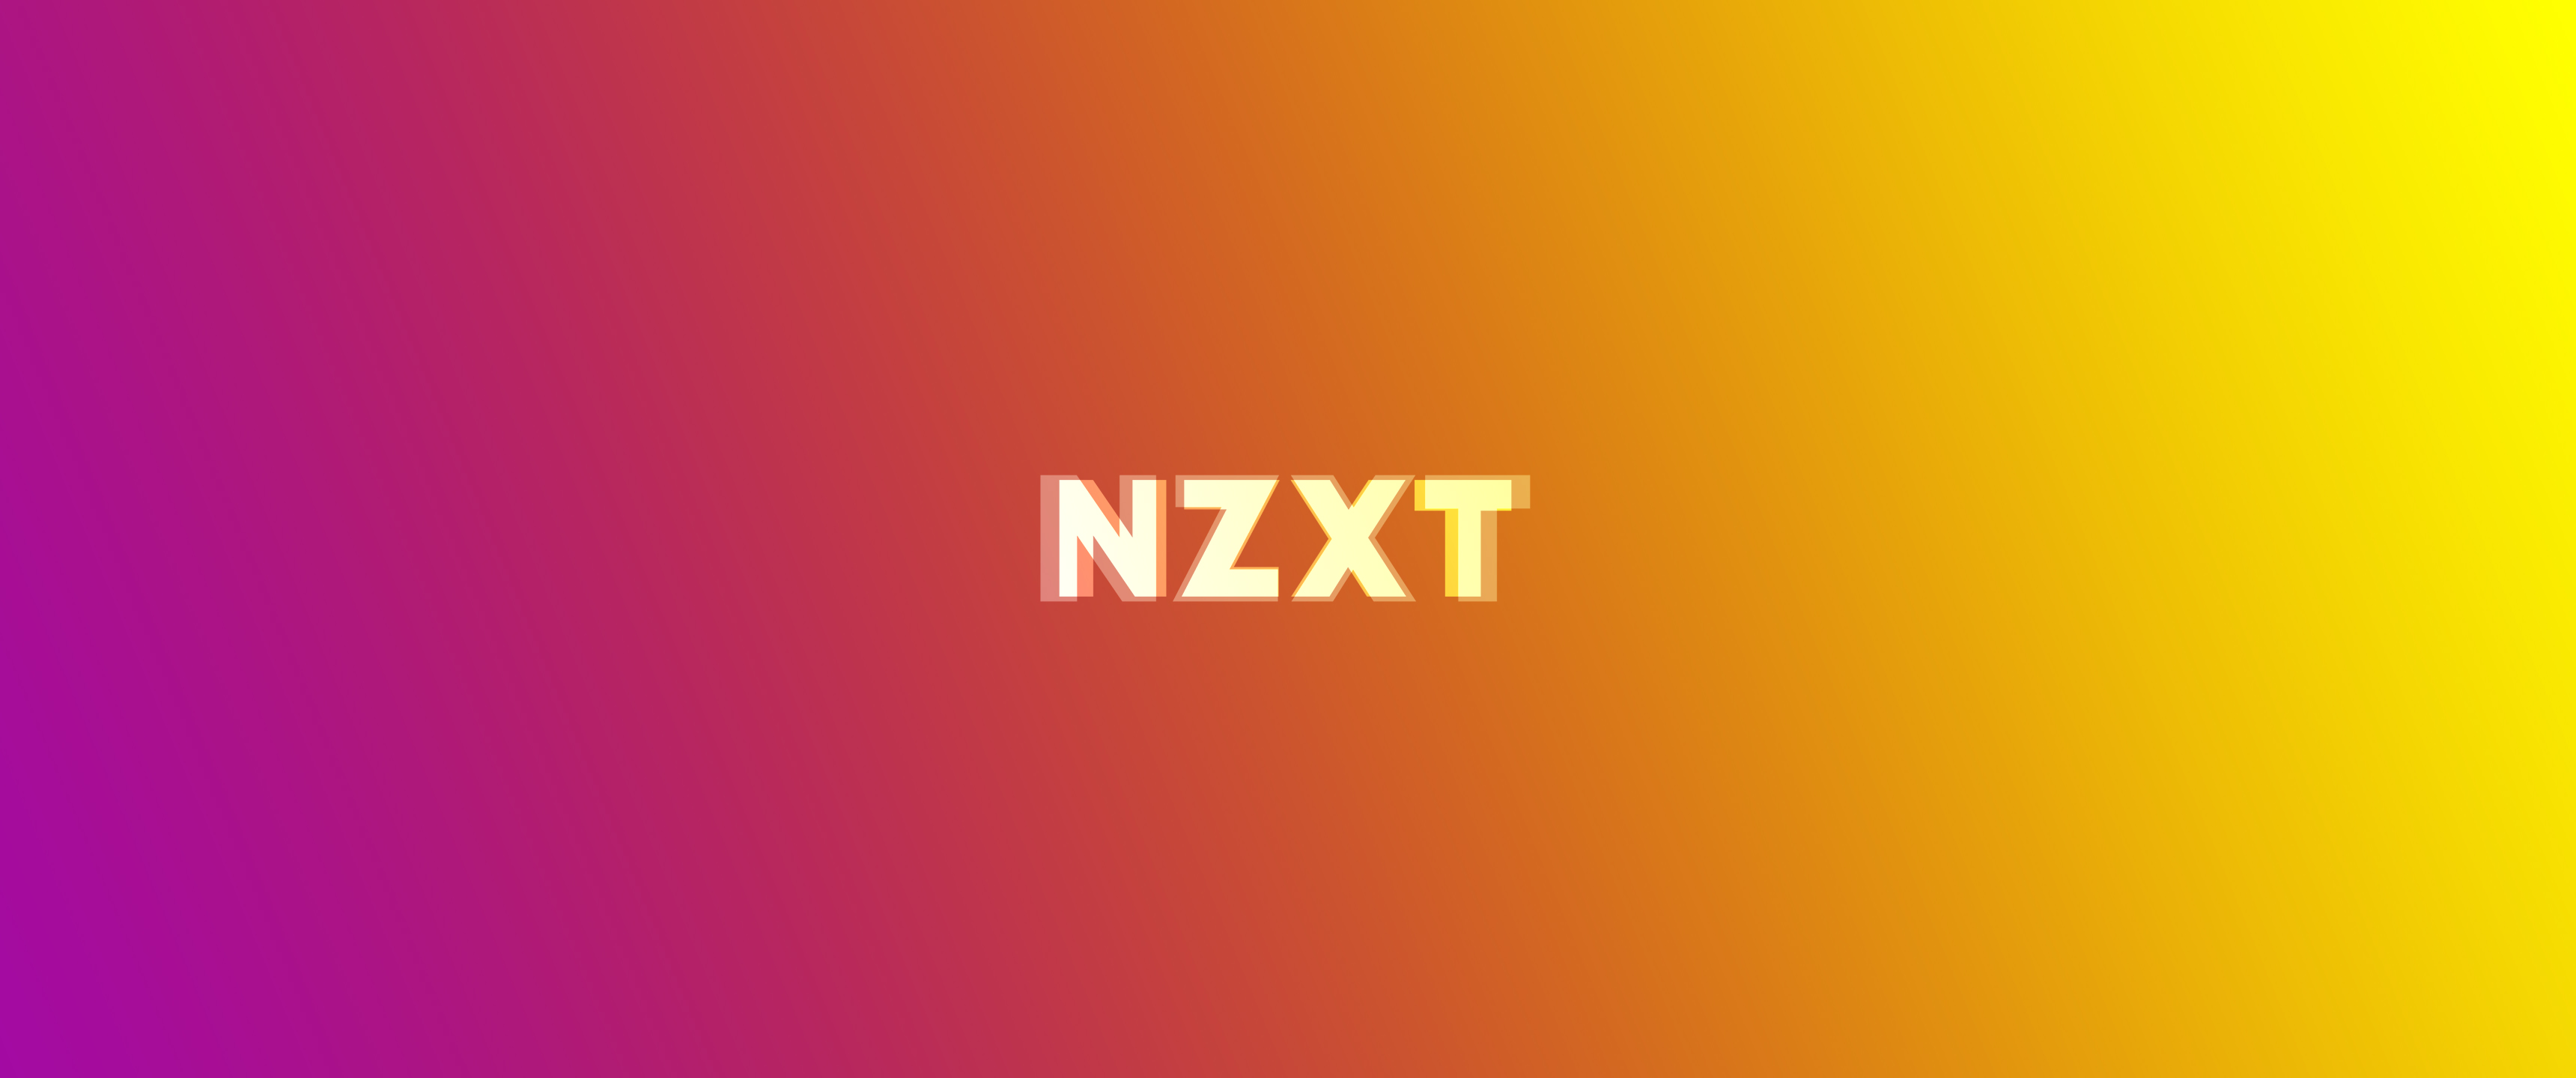 NZXT HD Wallpapers and Backgrounds. 